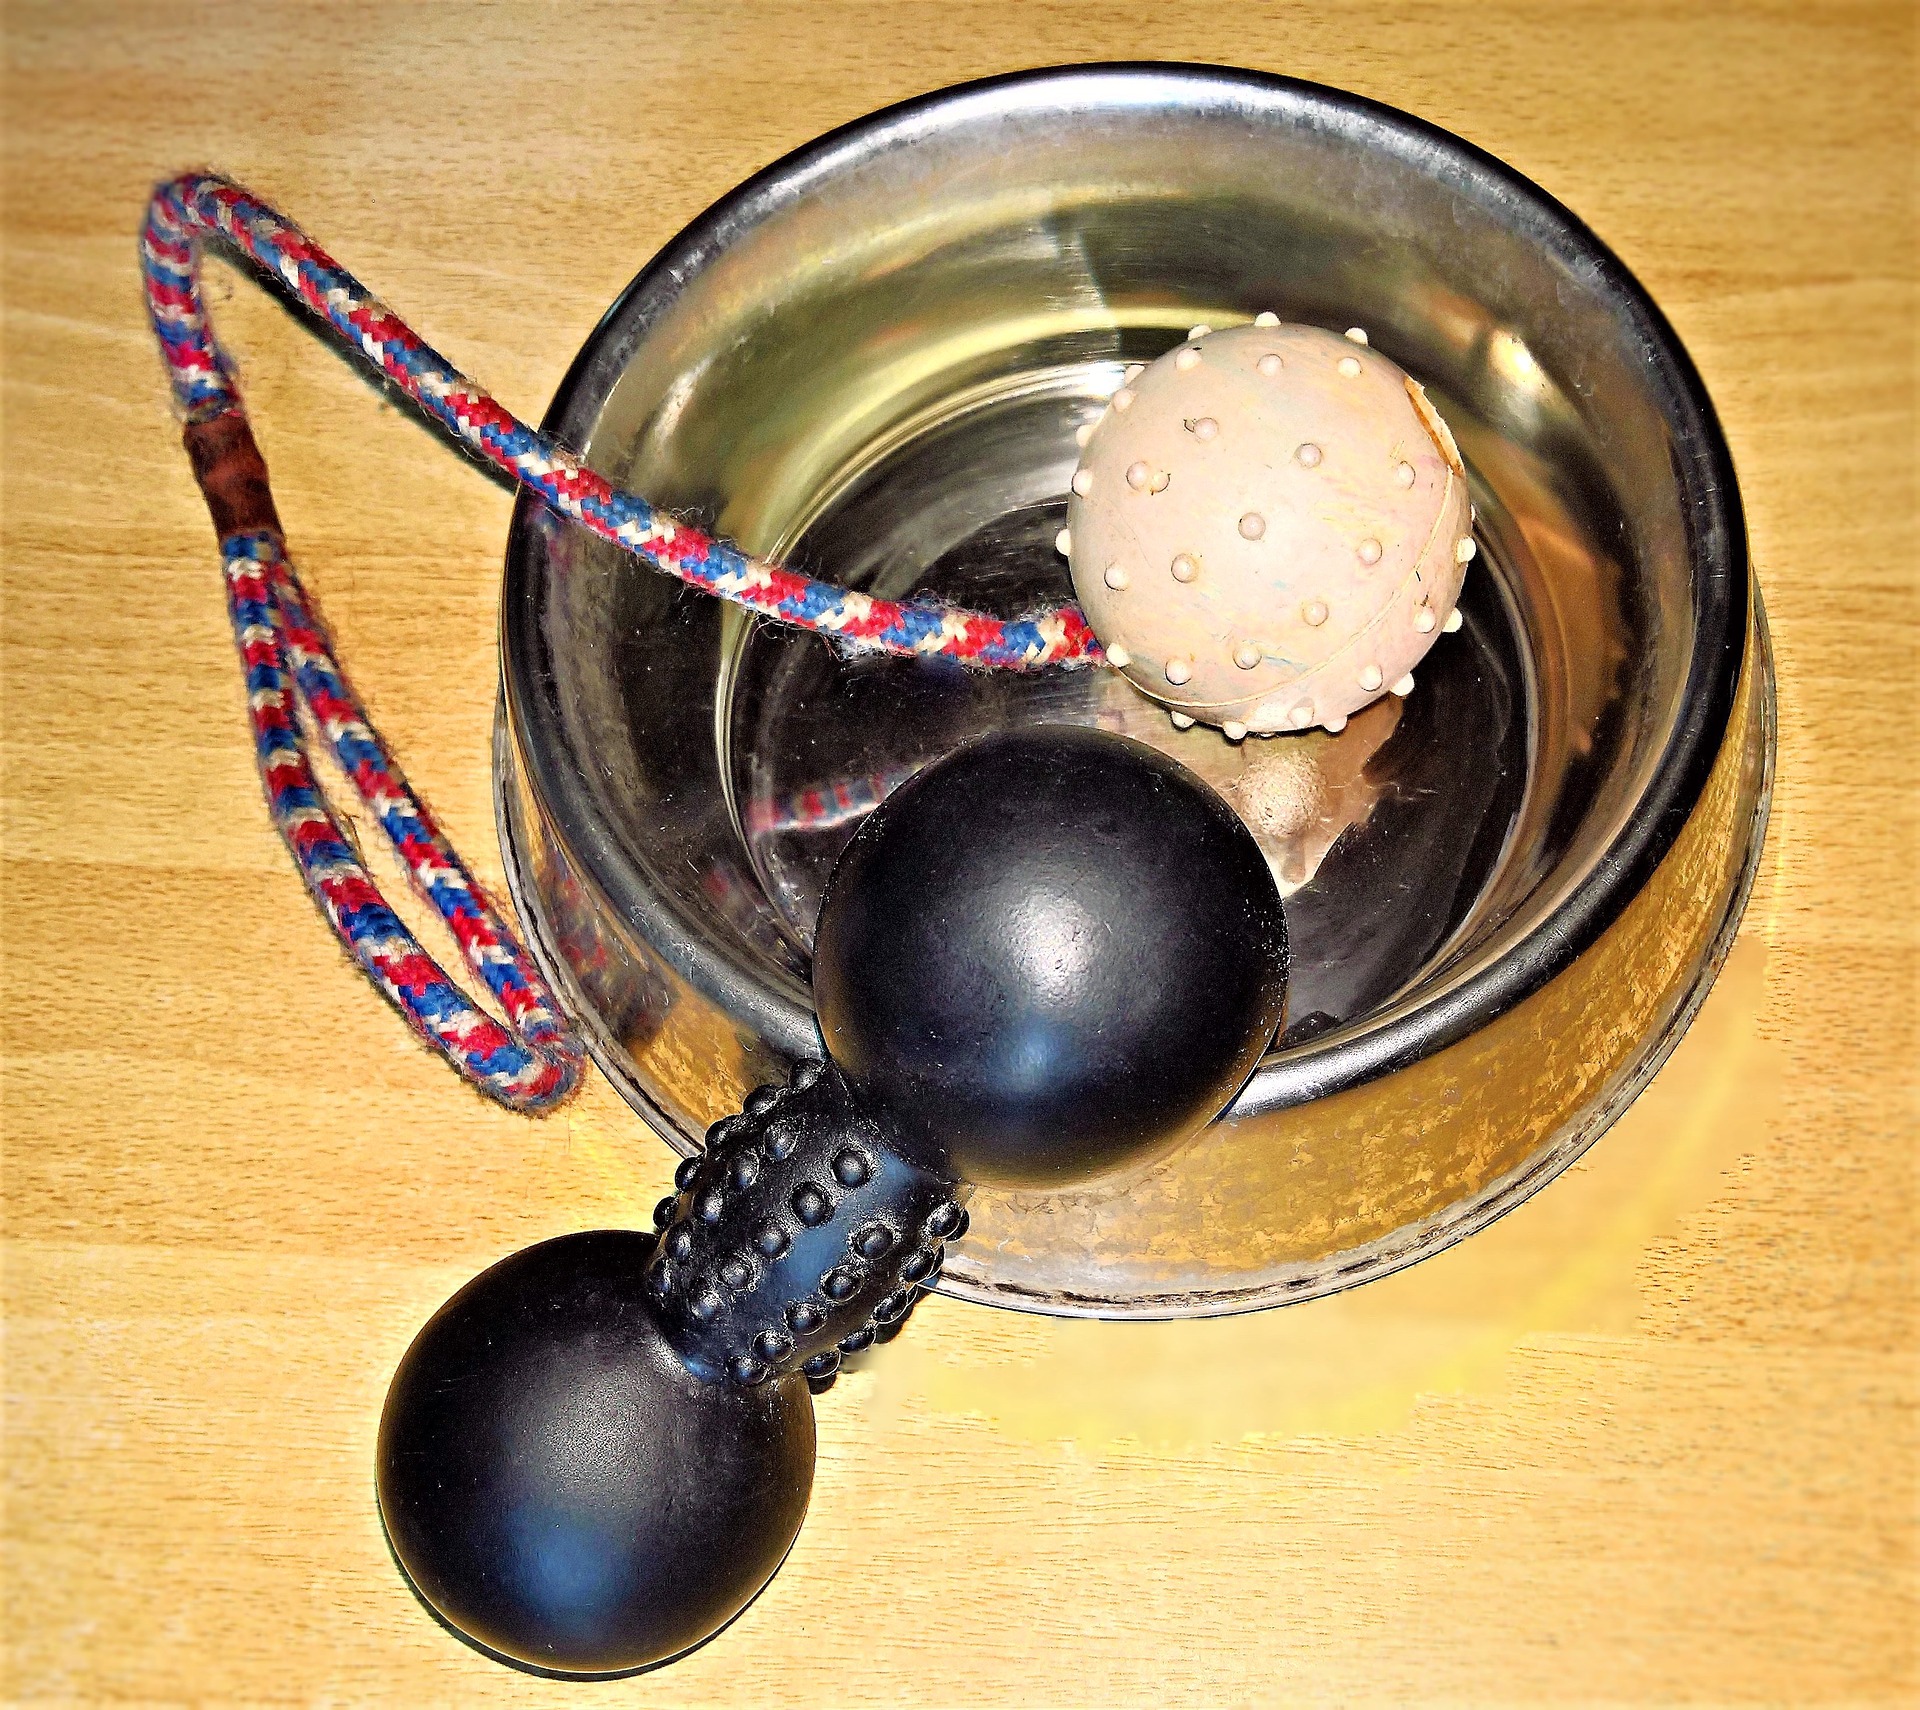 A dog bowl on a wooden surface full of dog toys: a rubber black toy with both ends rounded and the connective middle cylinder covered in raised bumps and a round tan ball also with raised bumps connected to a red, white and blue striped rope with a loop on one end